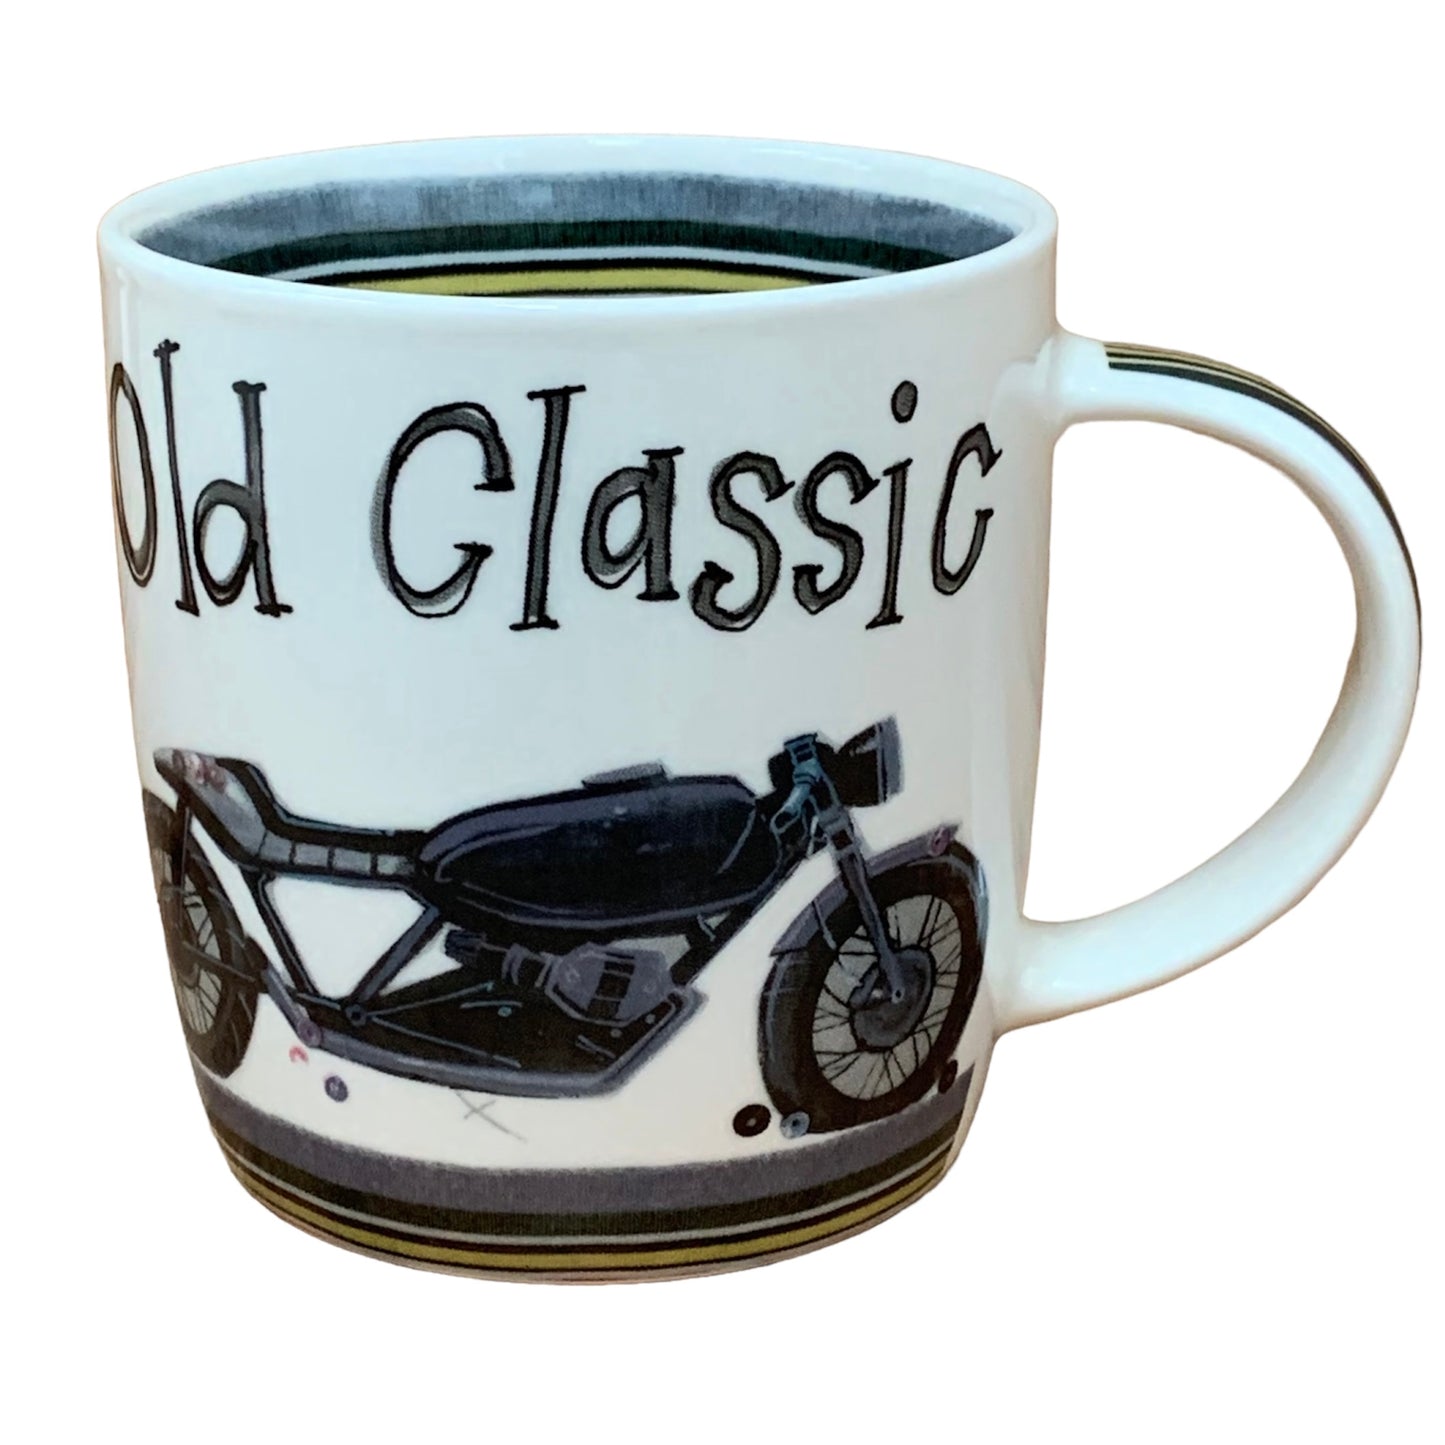 This Alex Clark mug is illustrated with an old classic bike and the words old classic written on the top of the mug.  This mug also features a bike track illustrations around the inside rim & down the handle.  